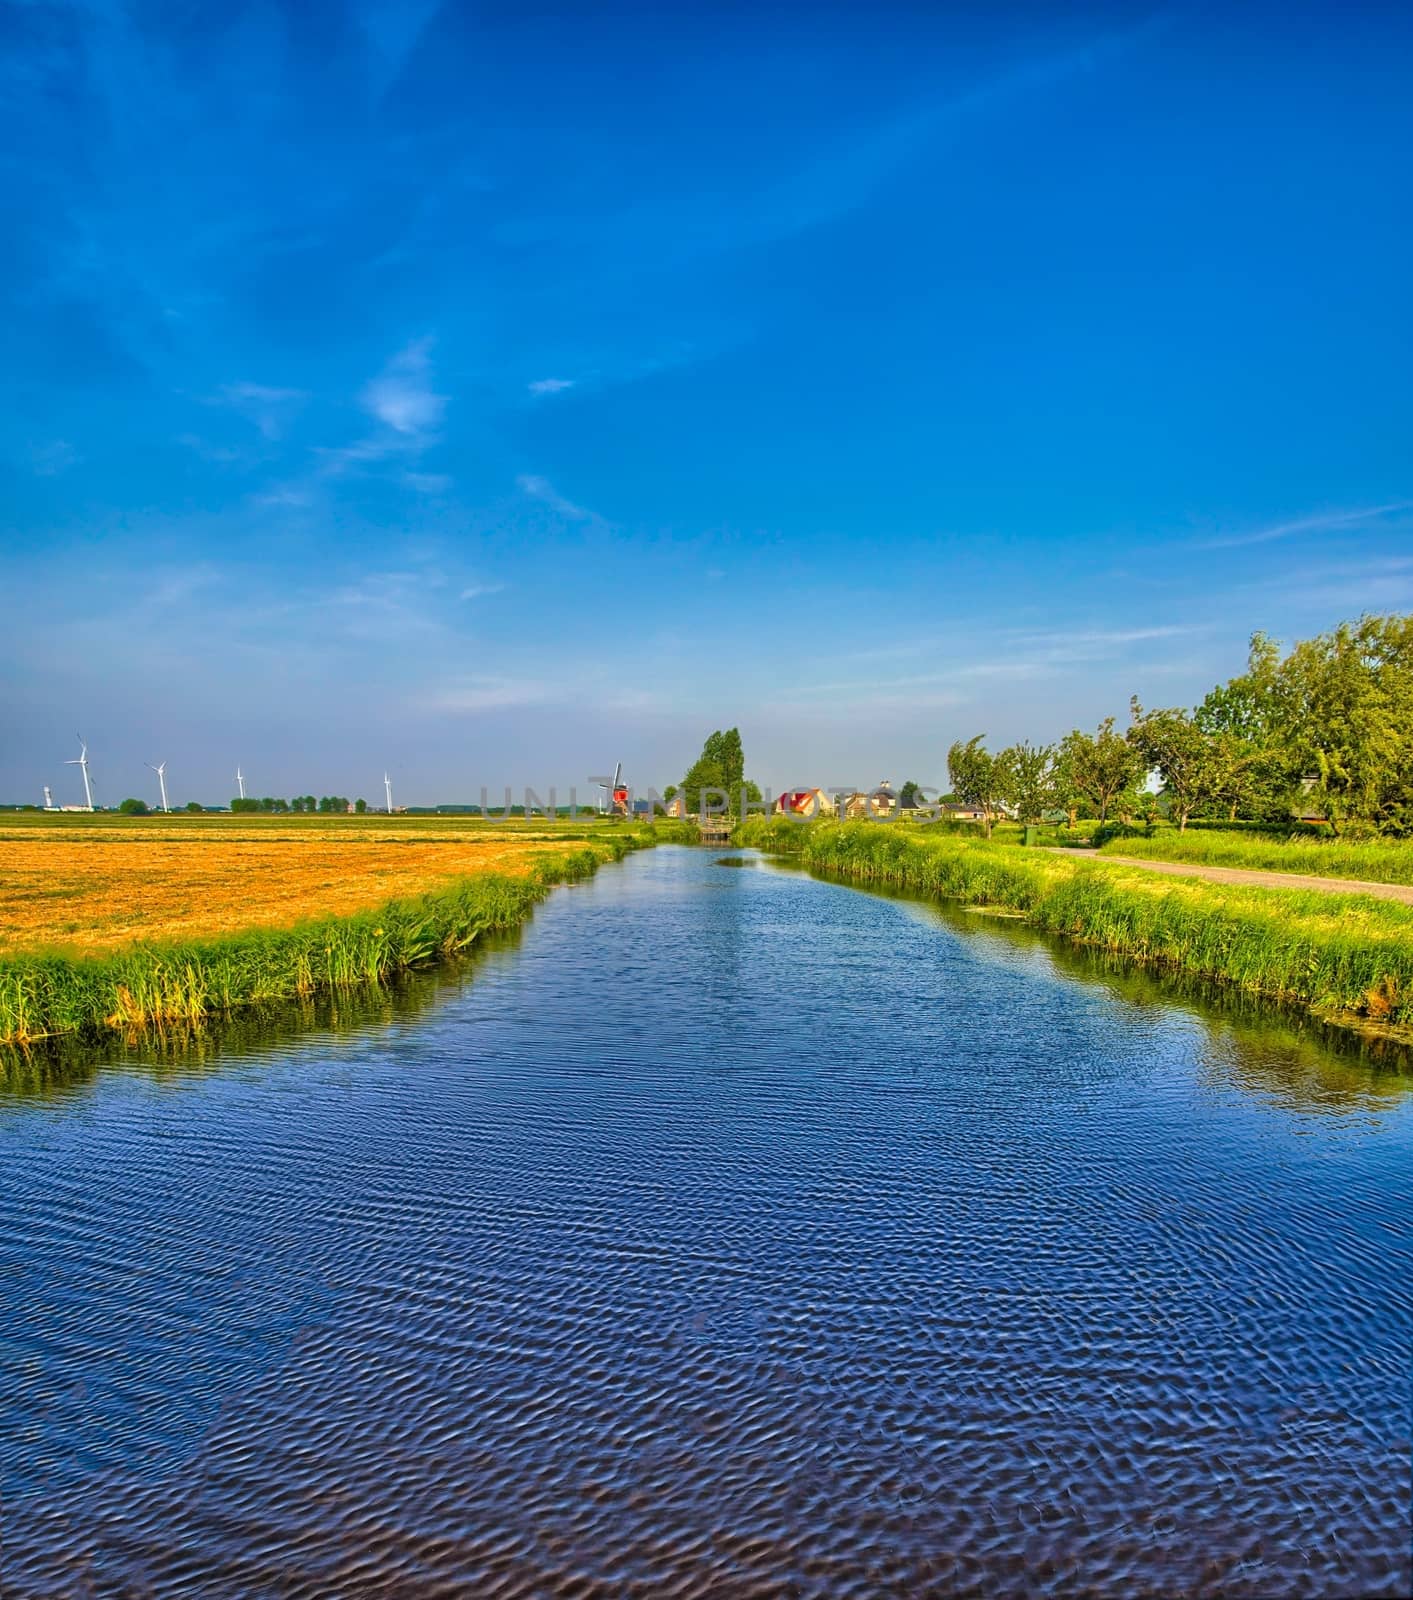 Dutch landscape with a canal and grass fields with mirror reflection in water, Amsterdam, Holland, Netherlands, HDR